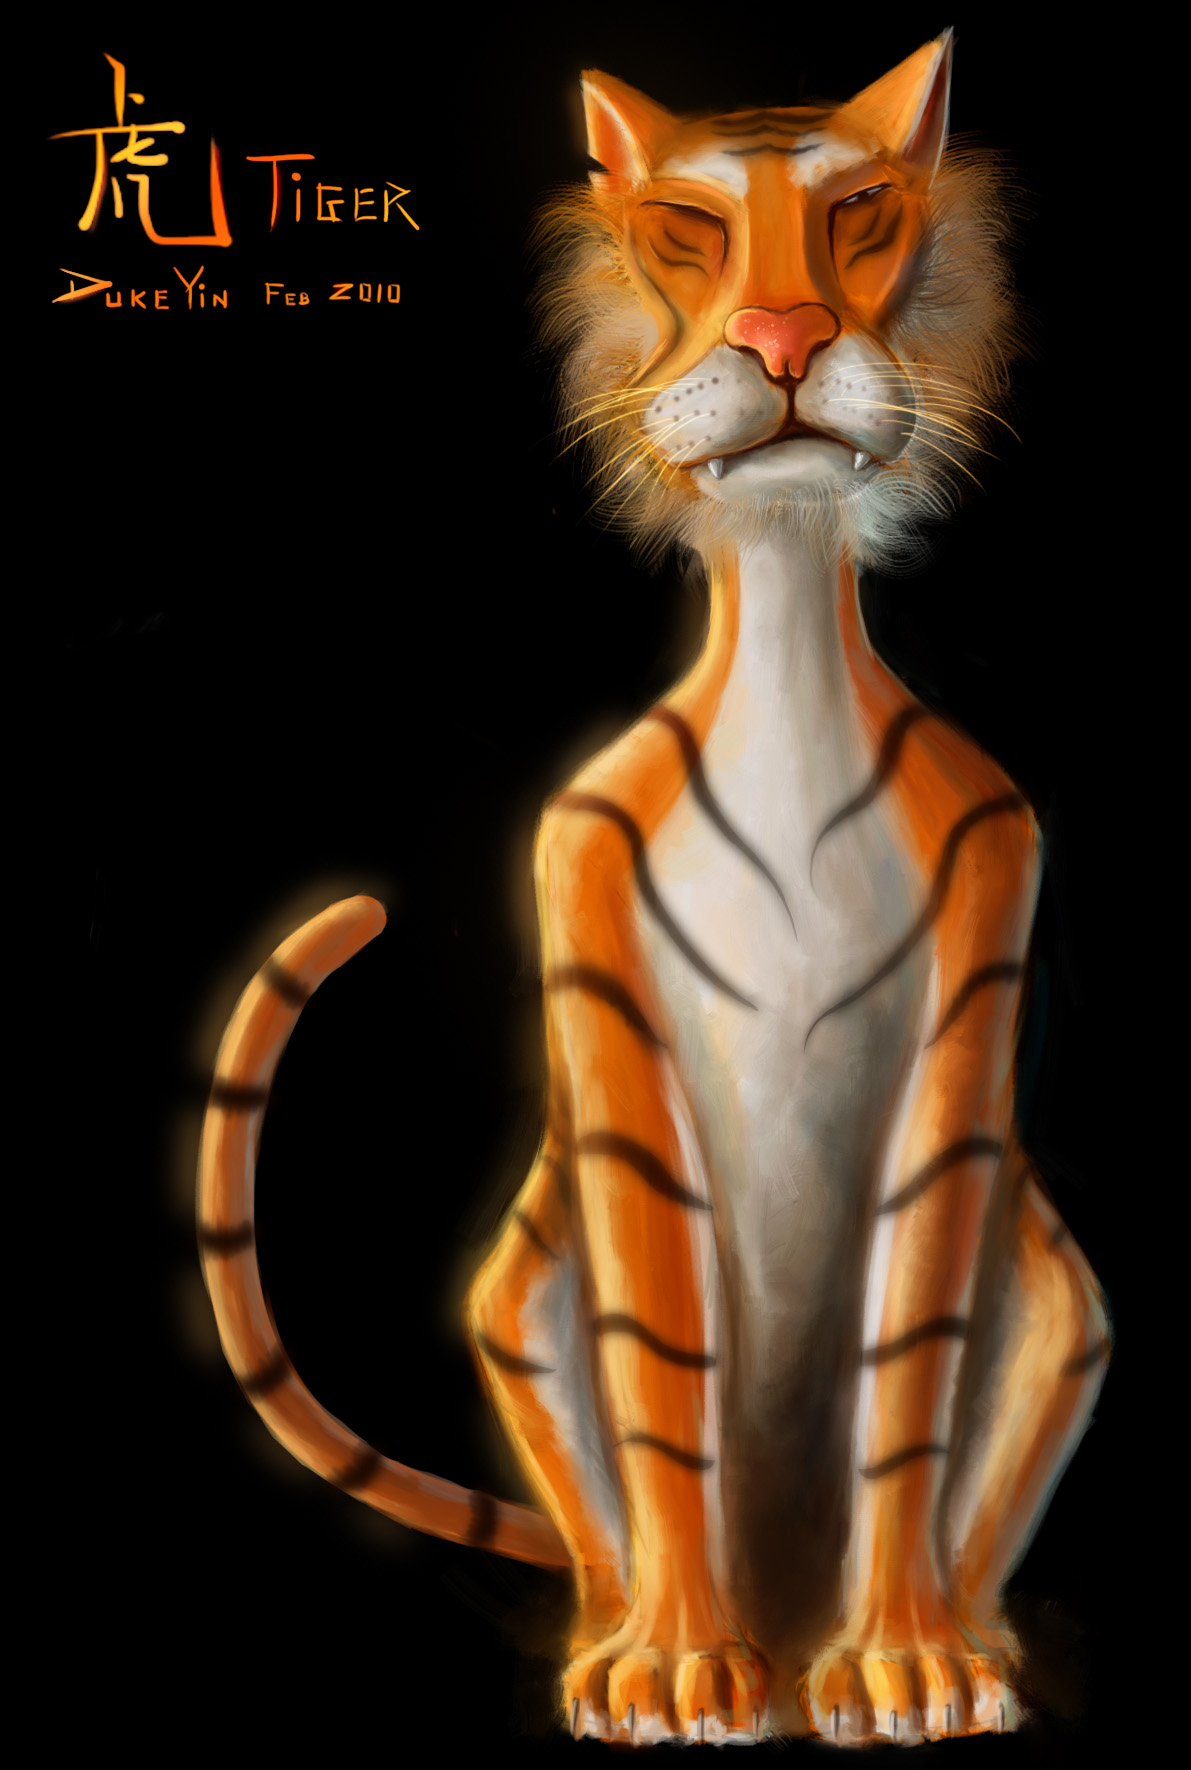 Year of TIGER 2010